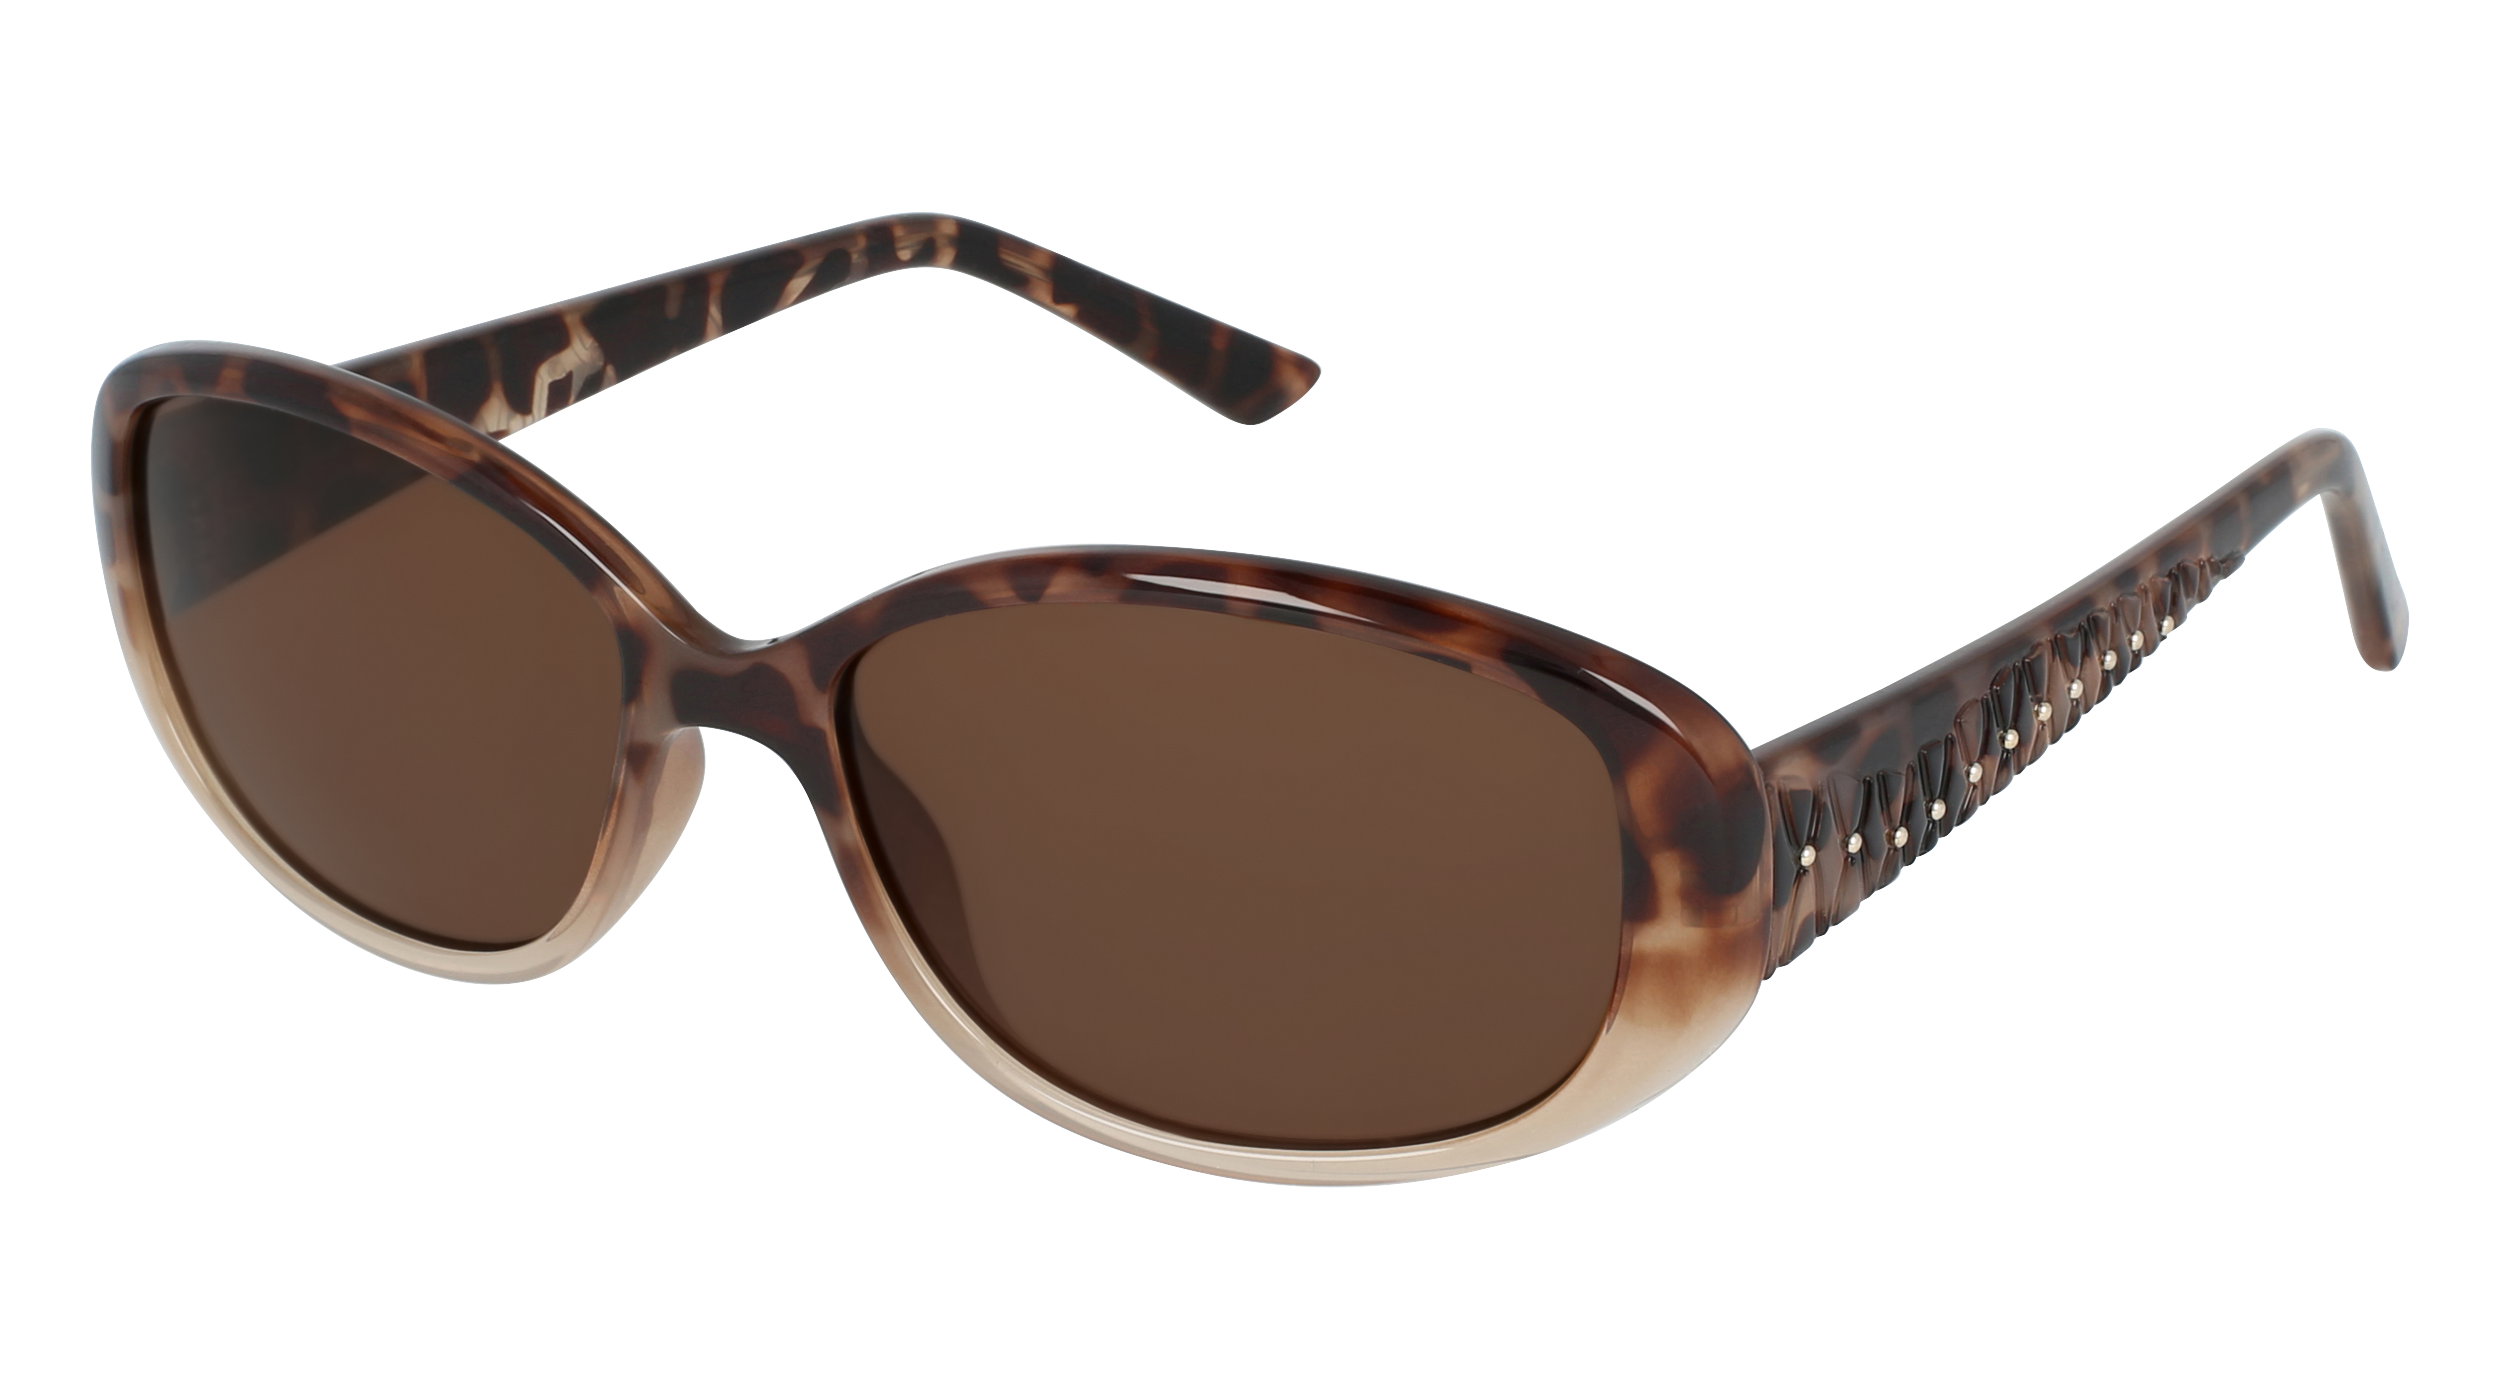 a S 714 women's sunglasses (from the side)